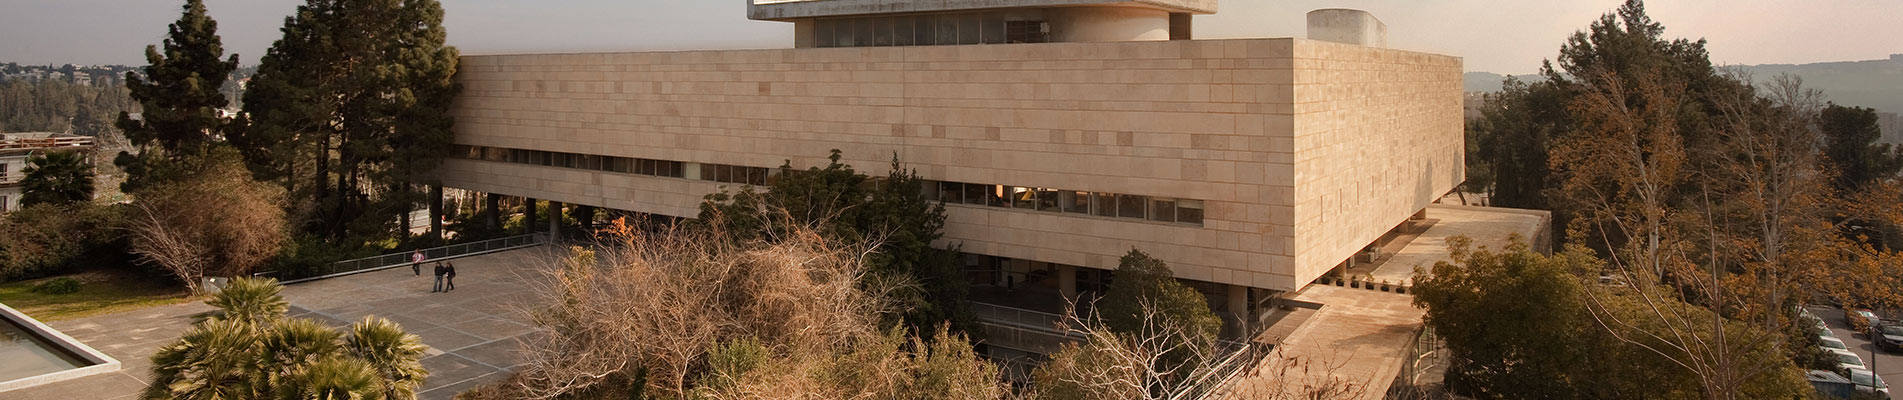 Self-Guided Tour in the National Library of Israel